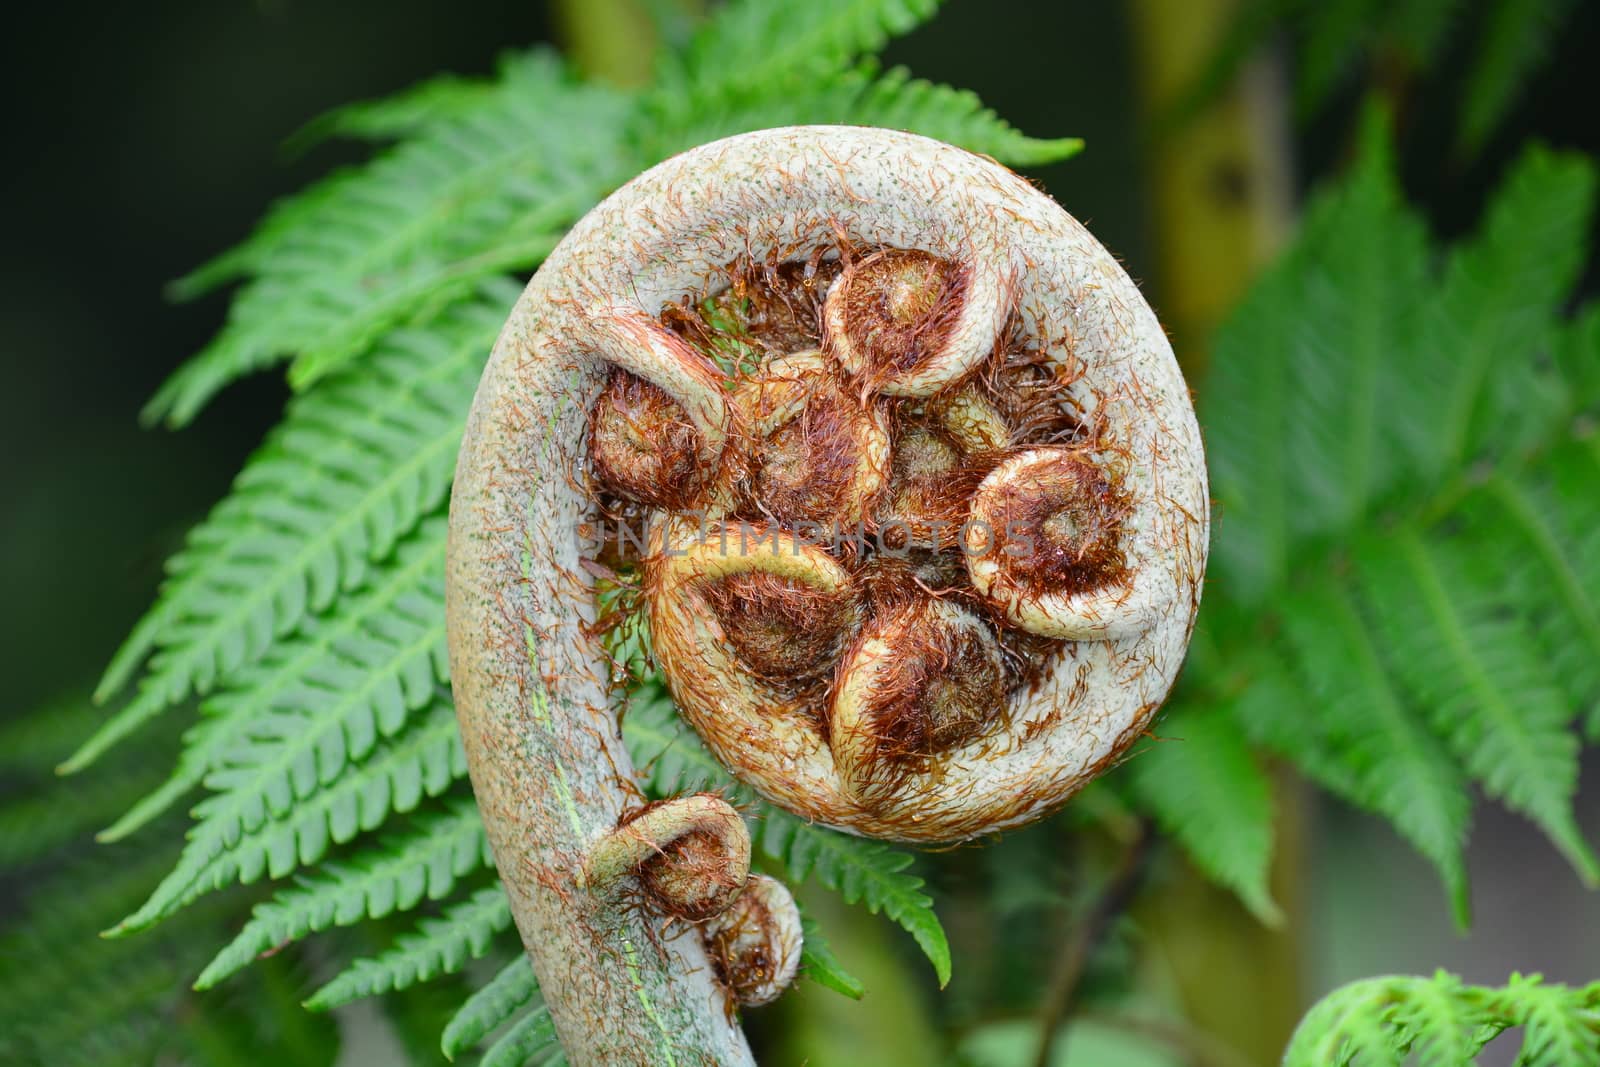 A close-up photo of a new unfurling silver fern frond (Cyathea dealbata). It is also known as koru (Māori word for "loop"), it symbolises new life, growth, strength and peace. by Marshalkina